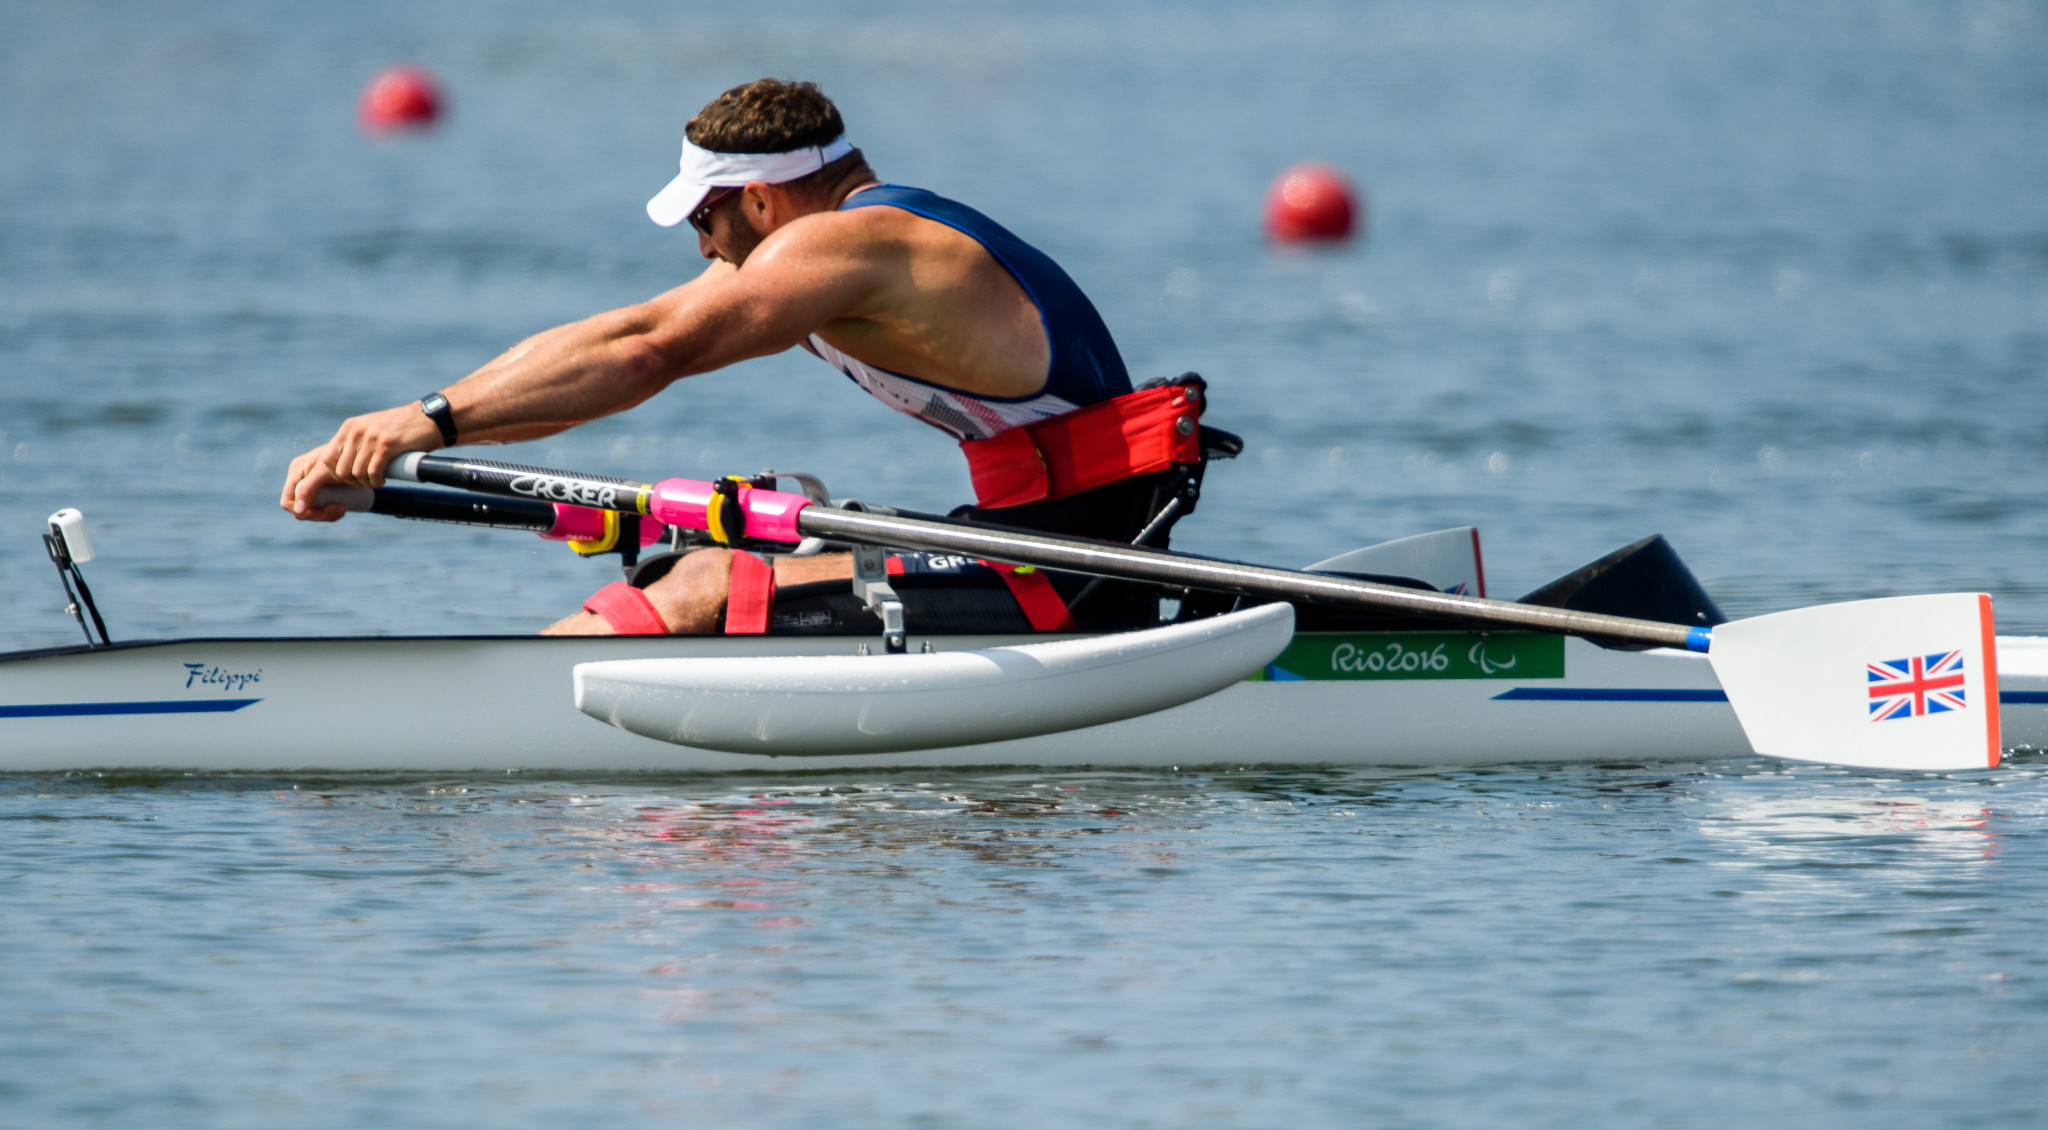 British Rowing announce new Power8 Sprints event in bid to grow sport